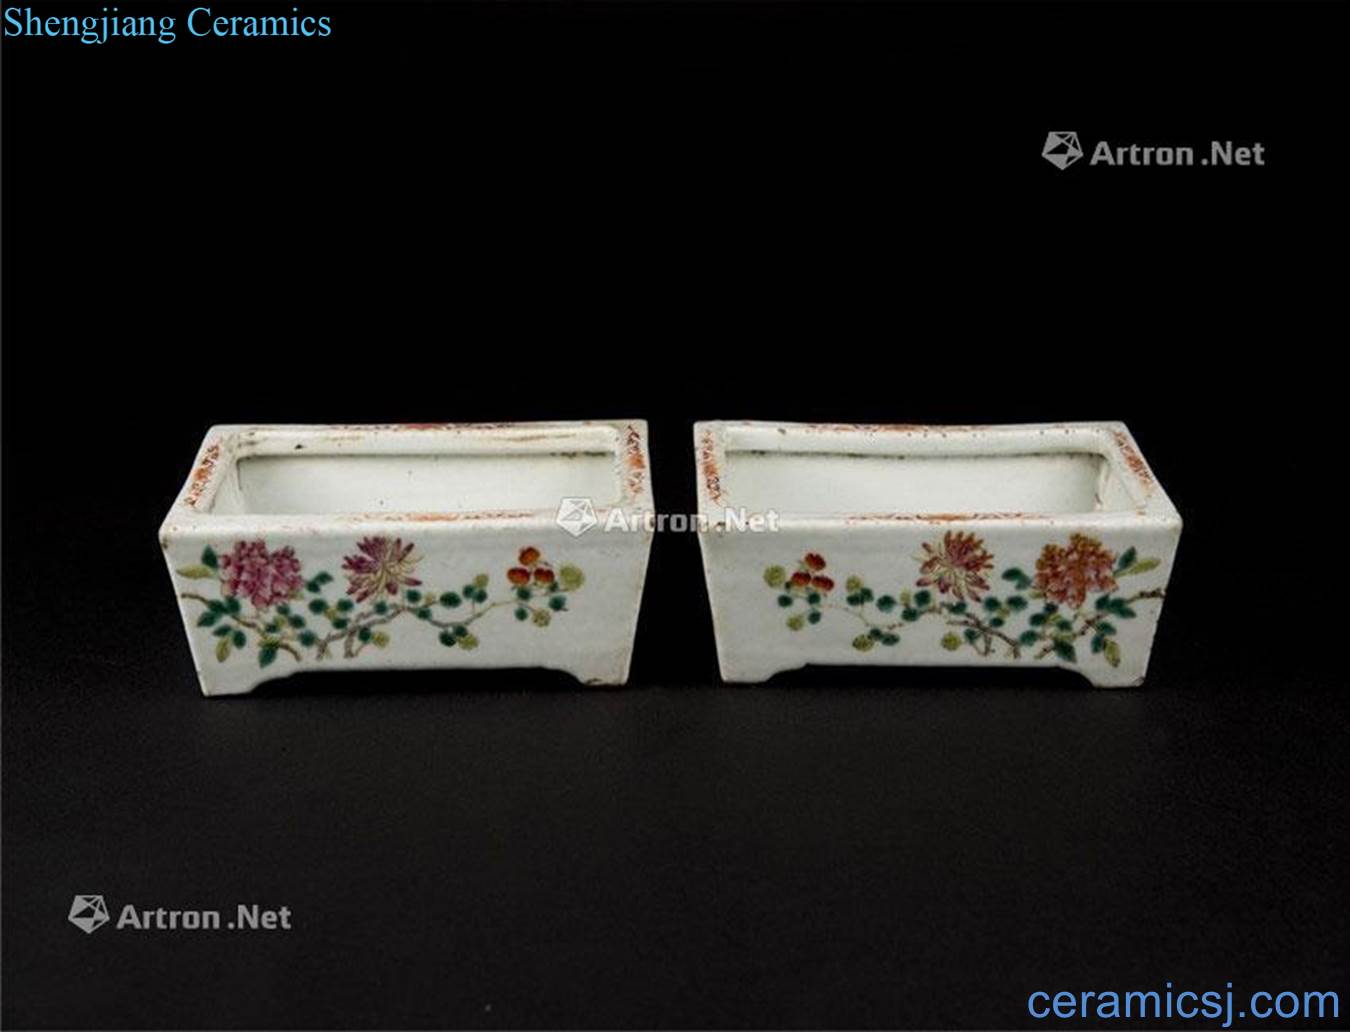 Dajing pastel pomegranate flower narcissus basin A pair of